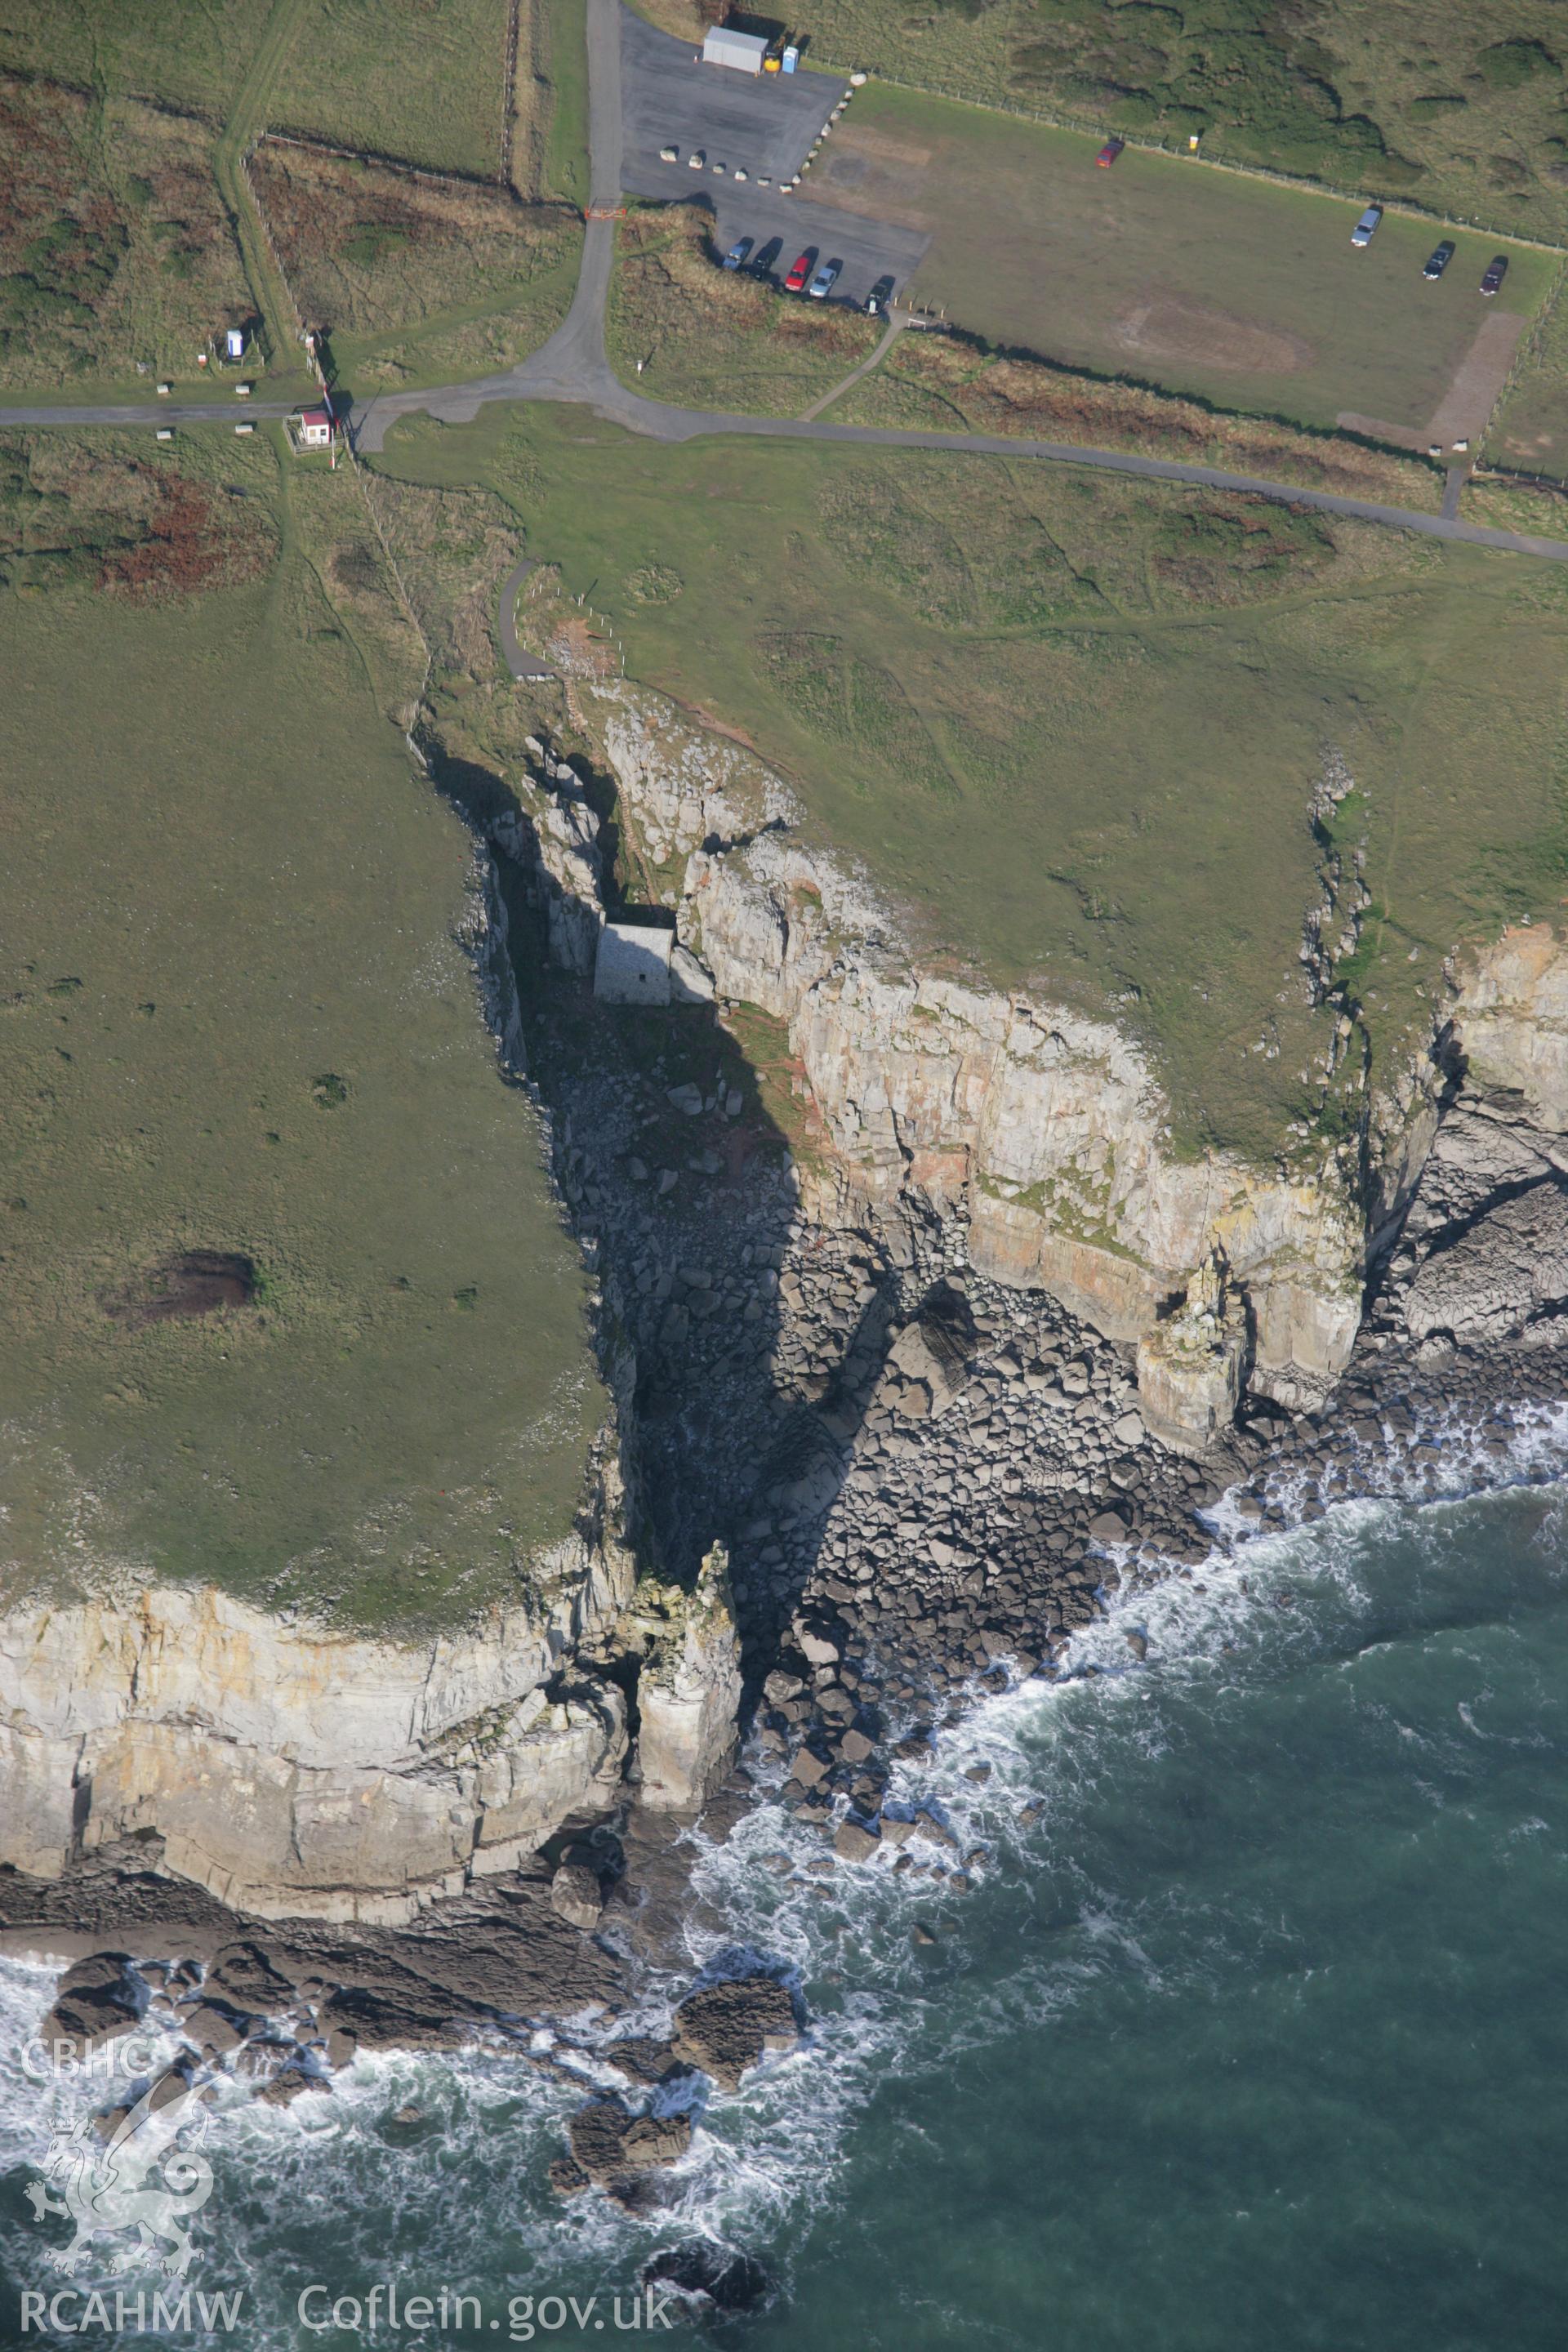 RCAHMW colour oblique aerial photograph of St Govan's Chapel and nearby well, from the south. Taken on 19 November 2005 by Toby Driver